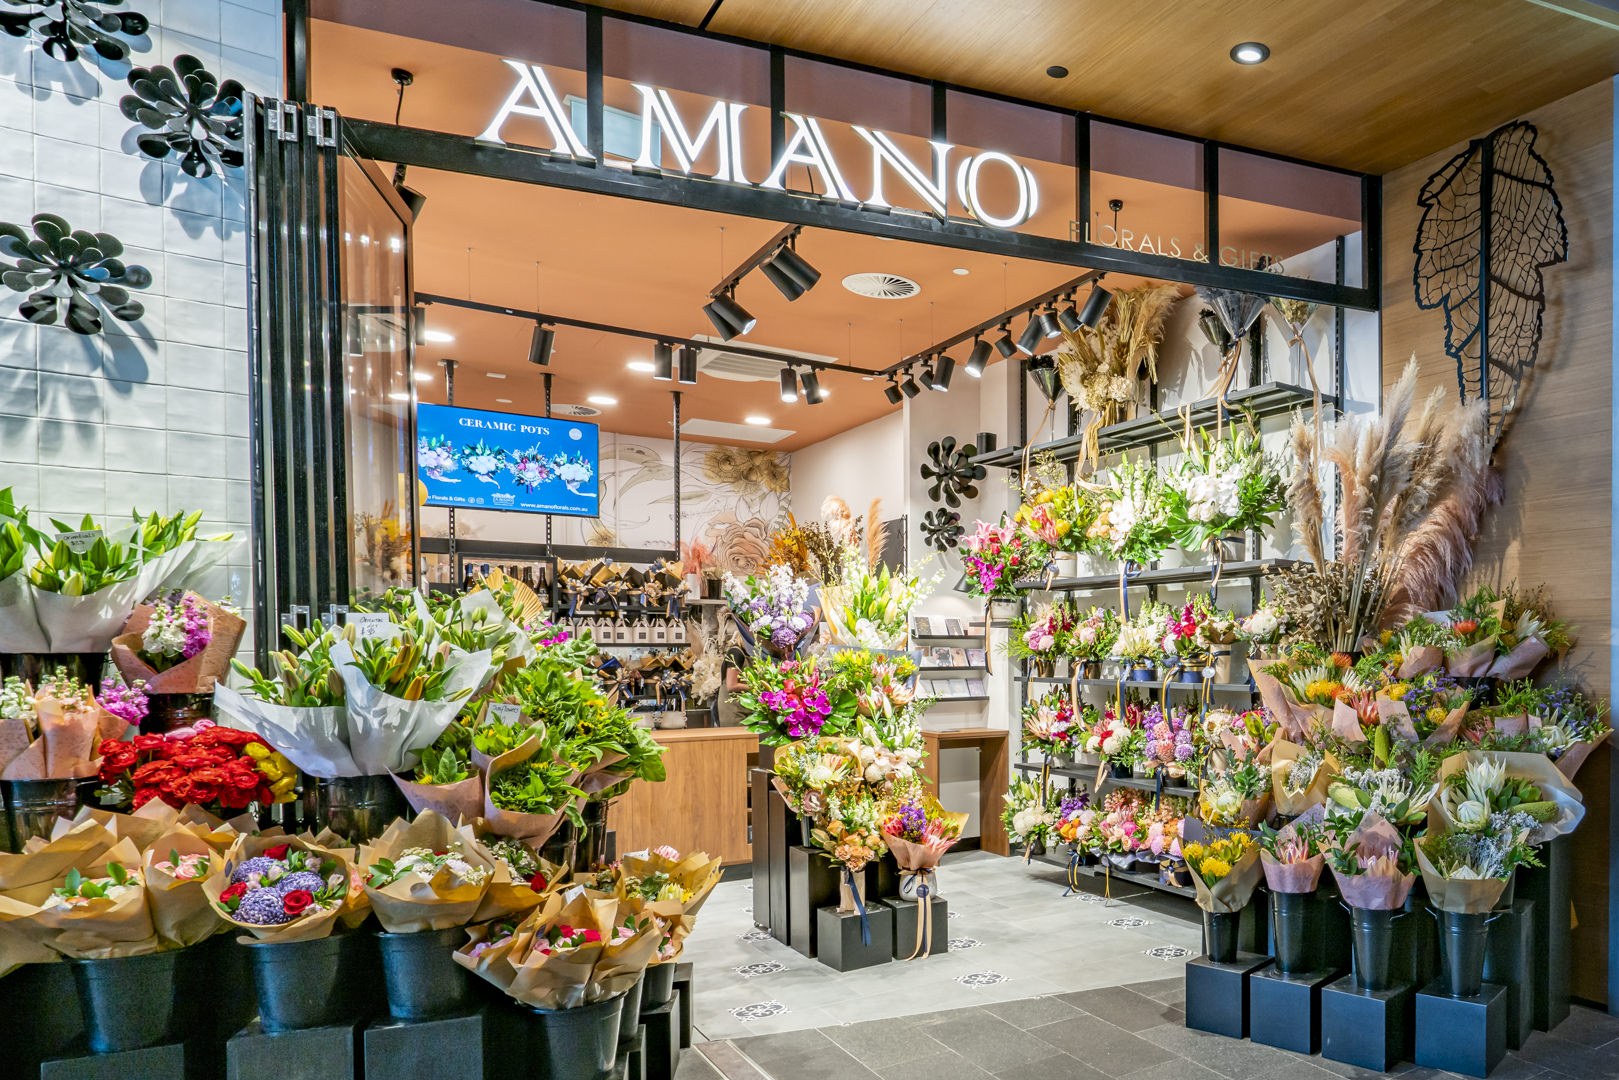 Amano Florals & Gifts